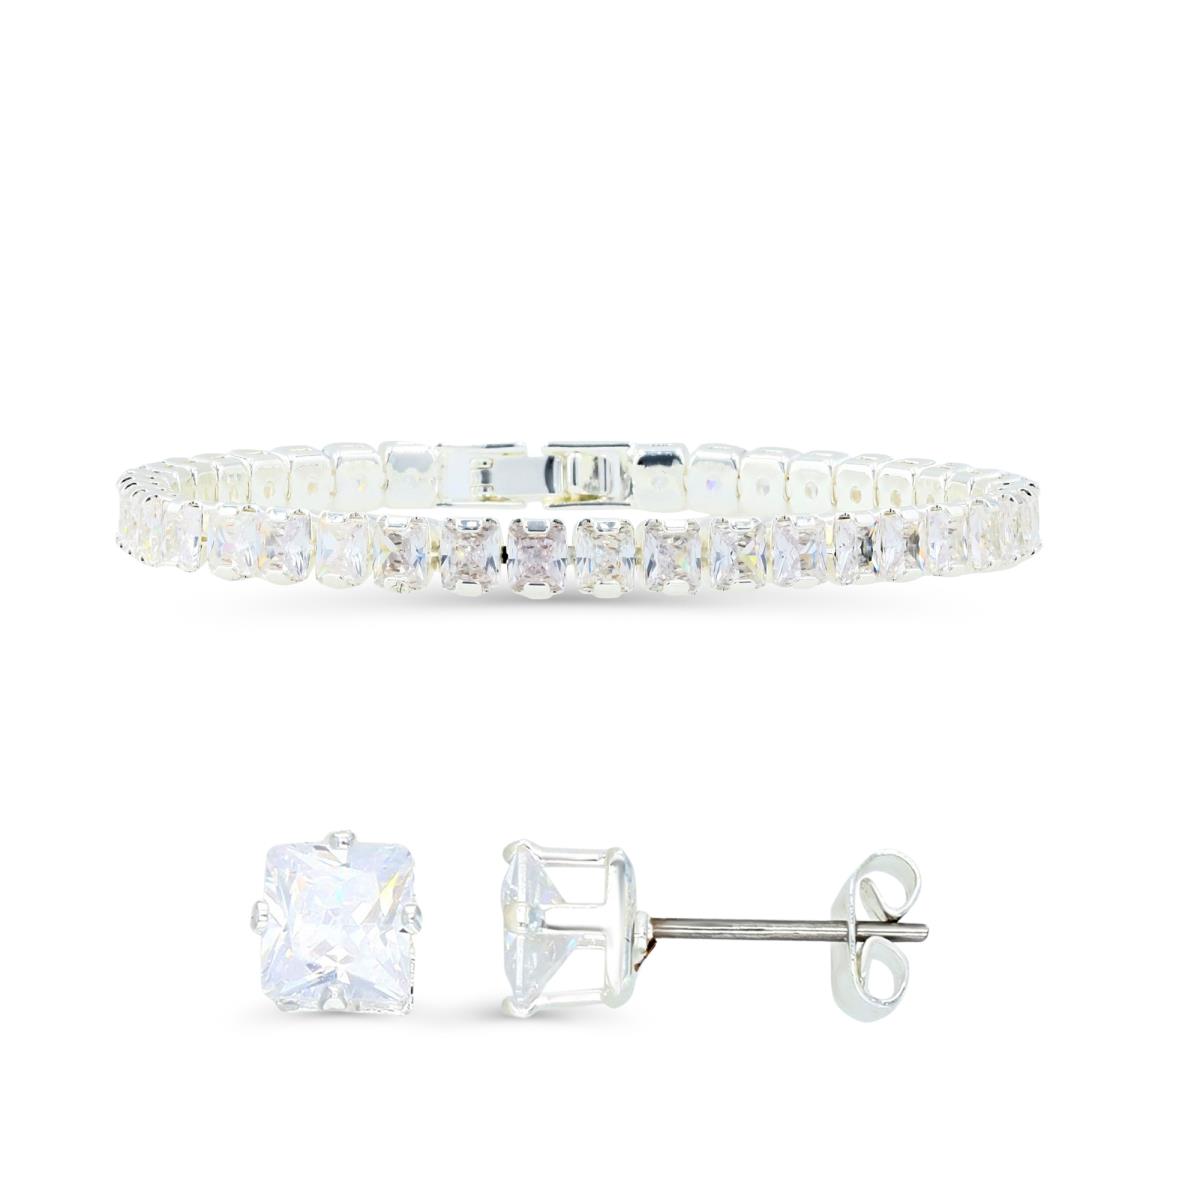 Platinum Plated Brass Silver Plated & White CZ 5MM Tennis Bracelet and 5MM PC White CZ Stud Earrings Set